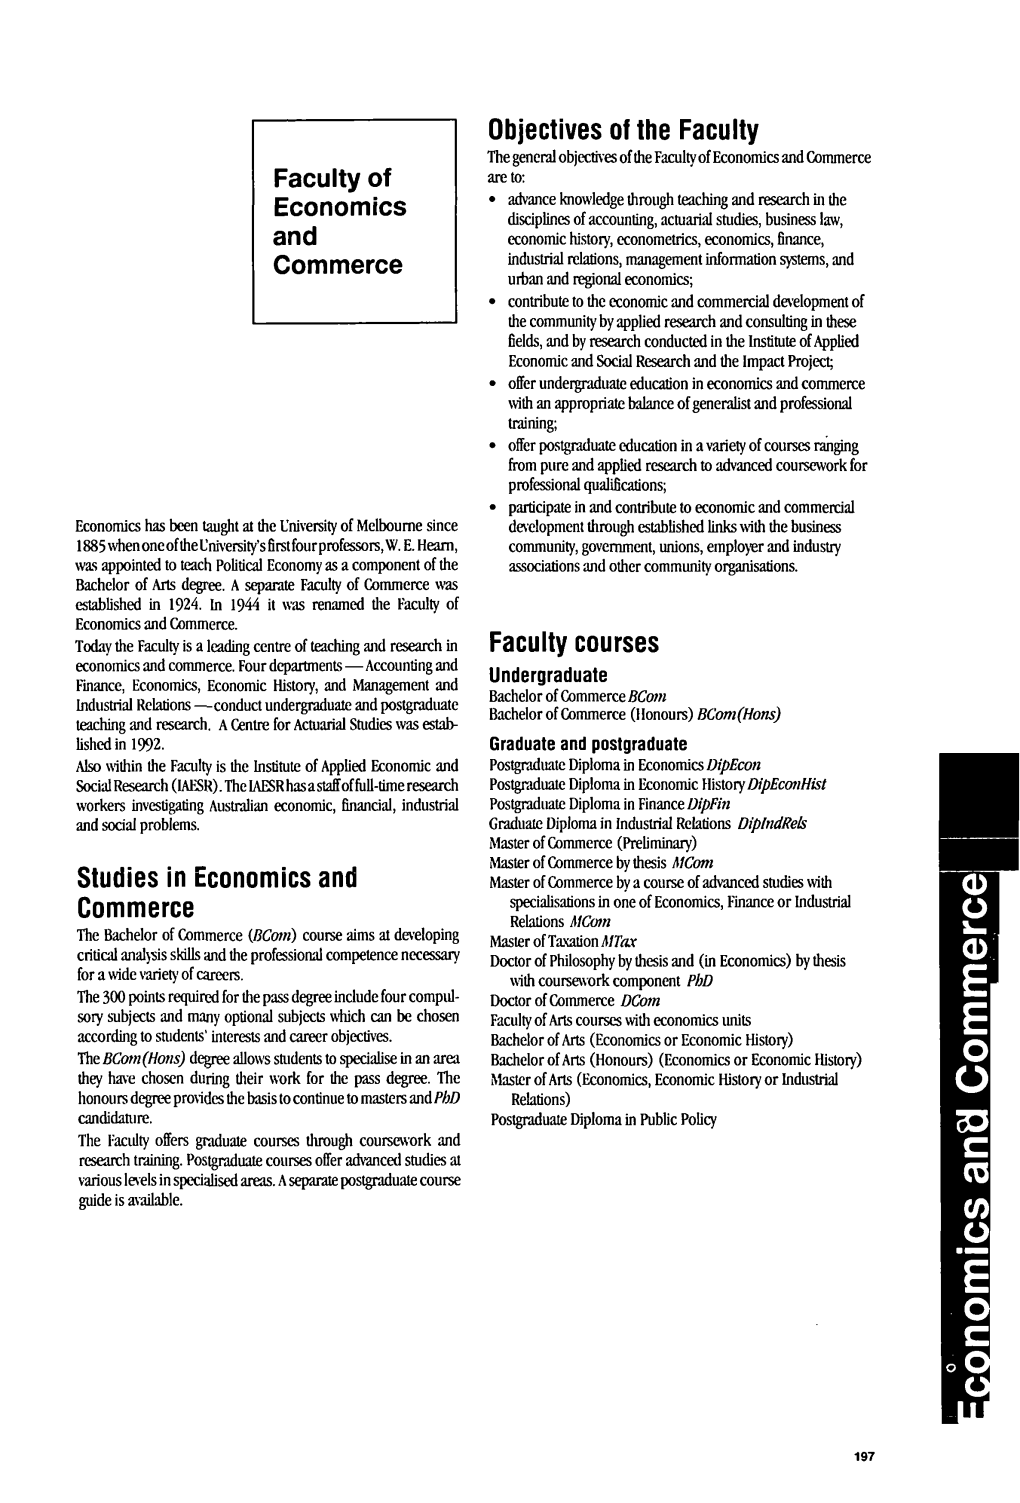 Faculty of Economics and Commerce Objectives of the Faculty Studies in Economics and Commerce Faculty Courses